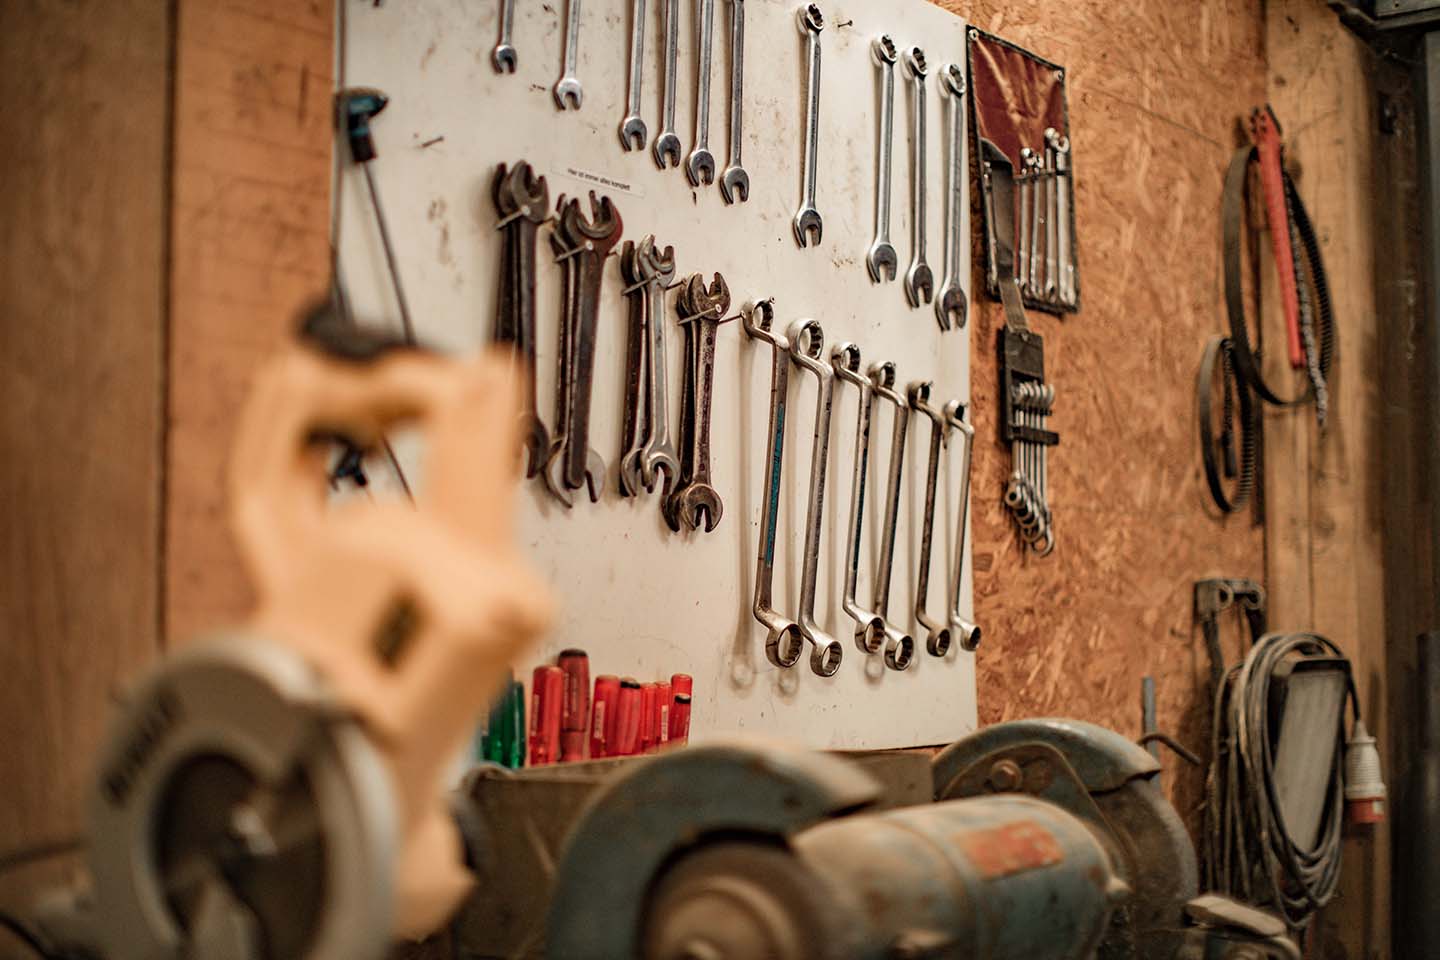 spanners and other mechanic tools hanging on a wall in a workshop